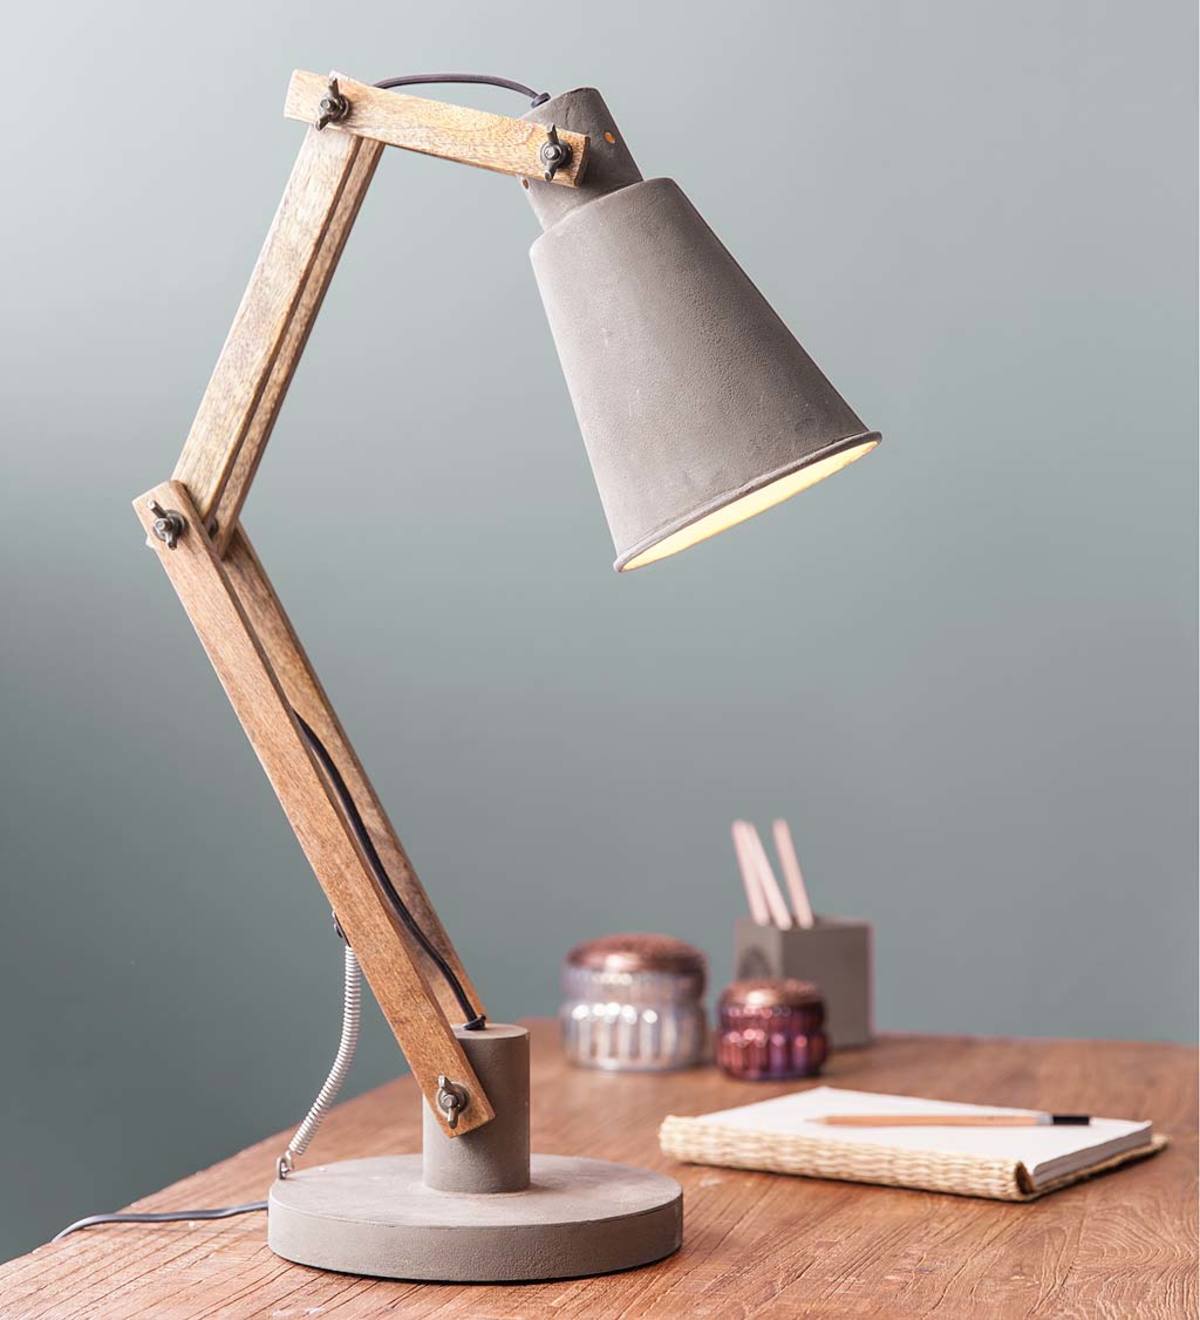 cement table lamp